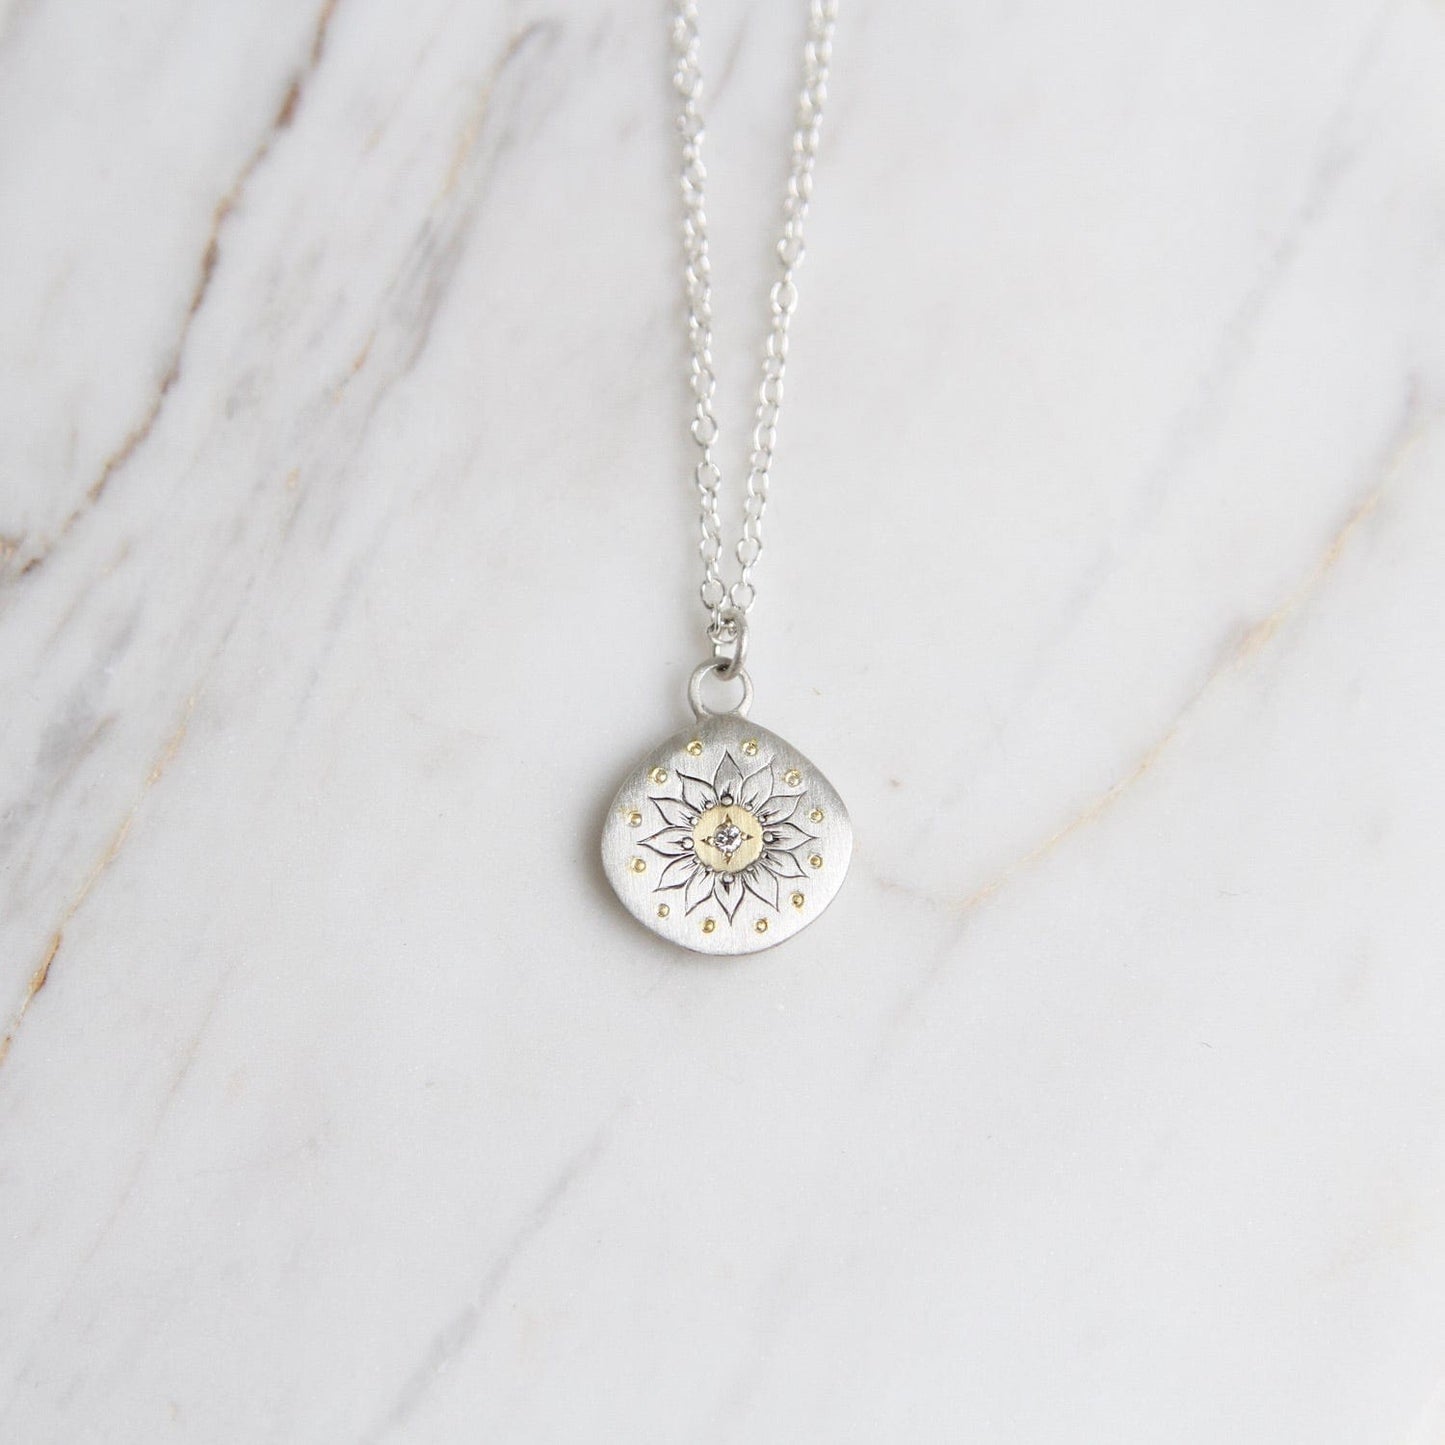 NKL Soleil Charm with Diamond